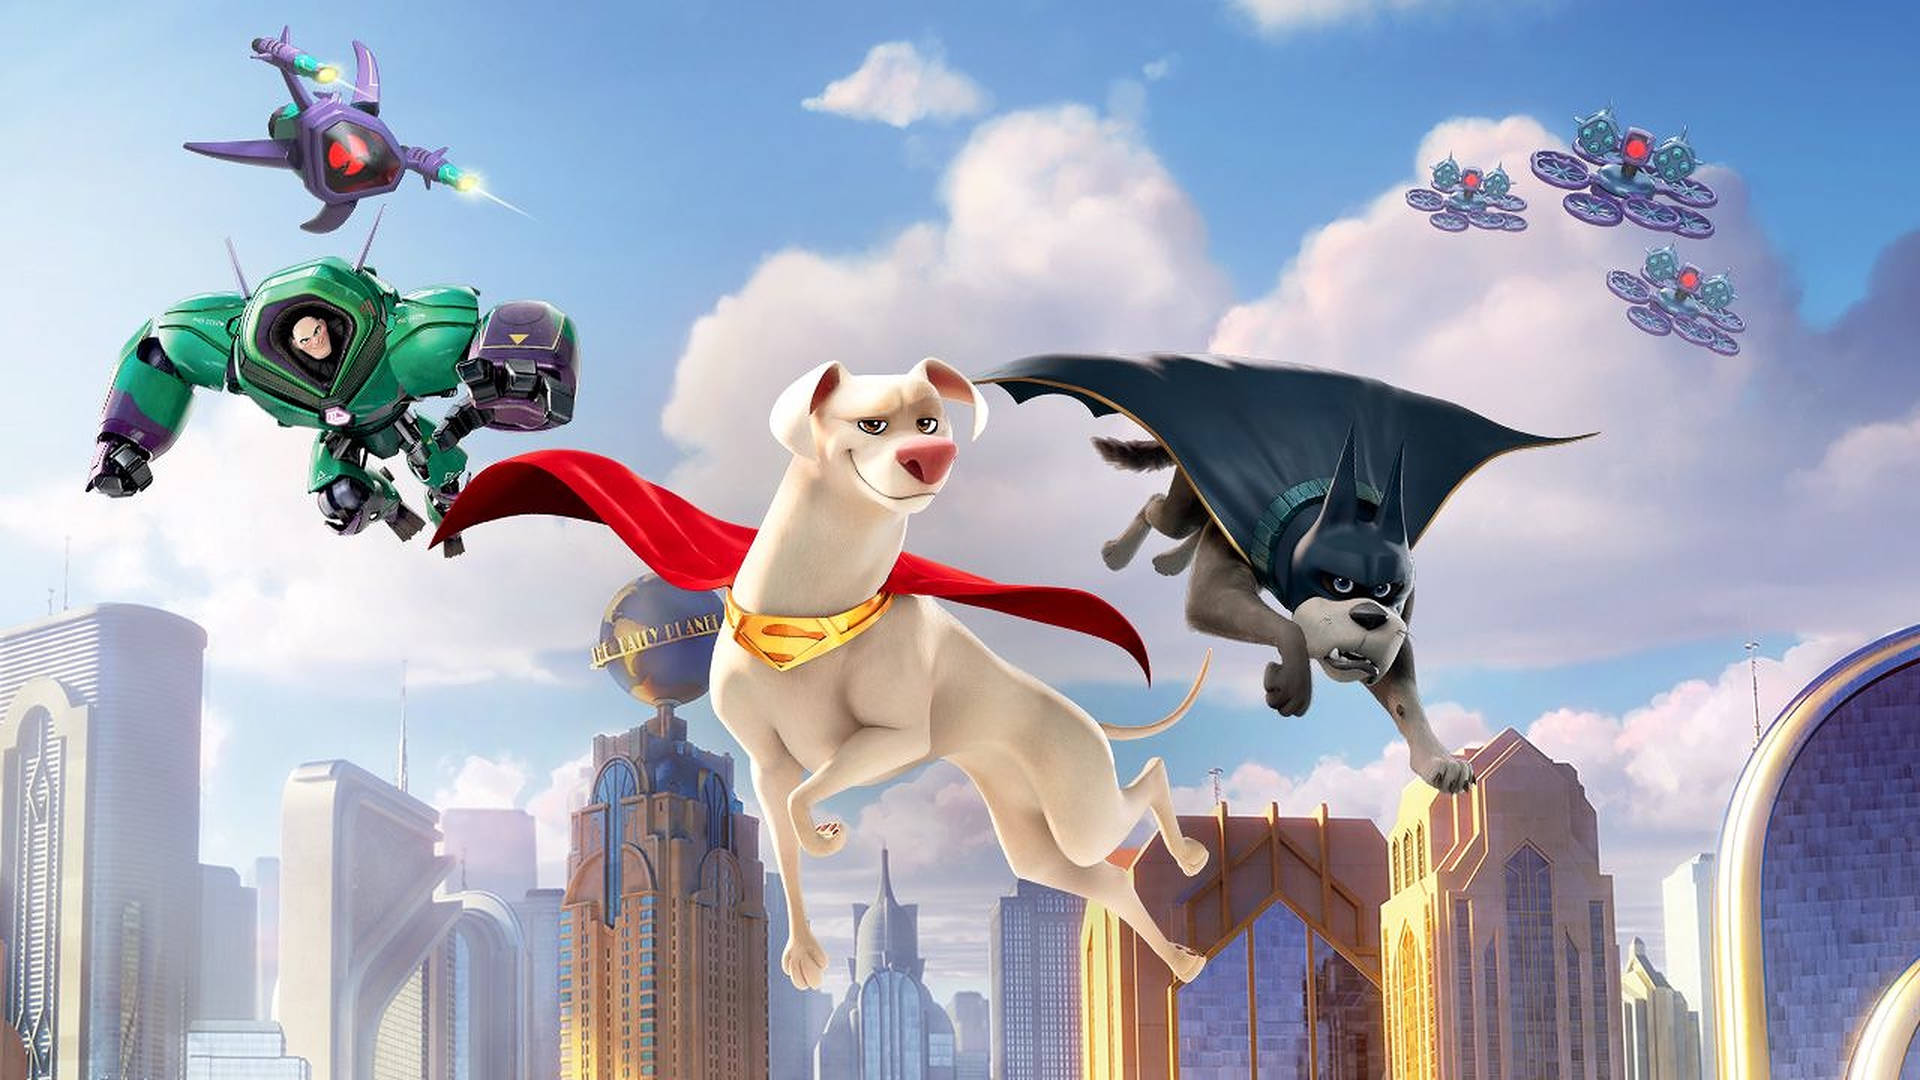 Dc League Of Super Pets In The Sky Background